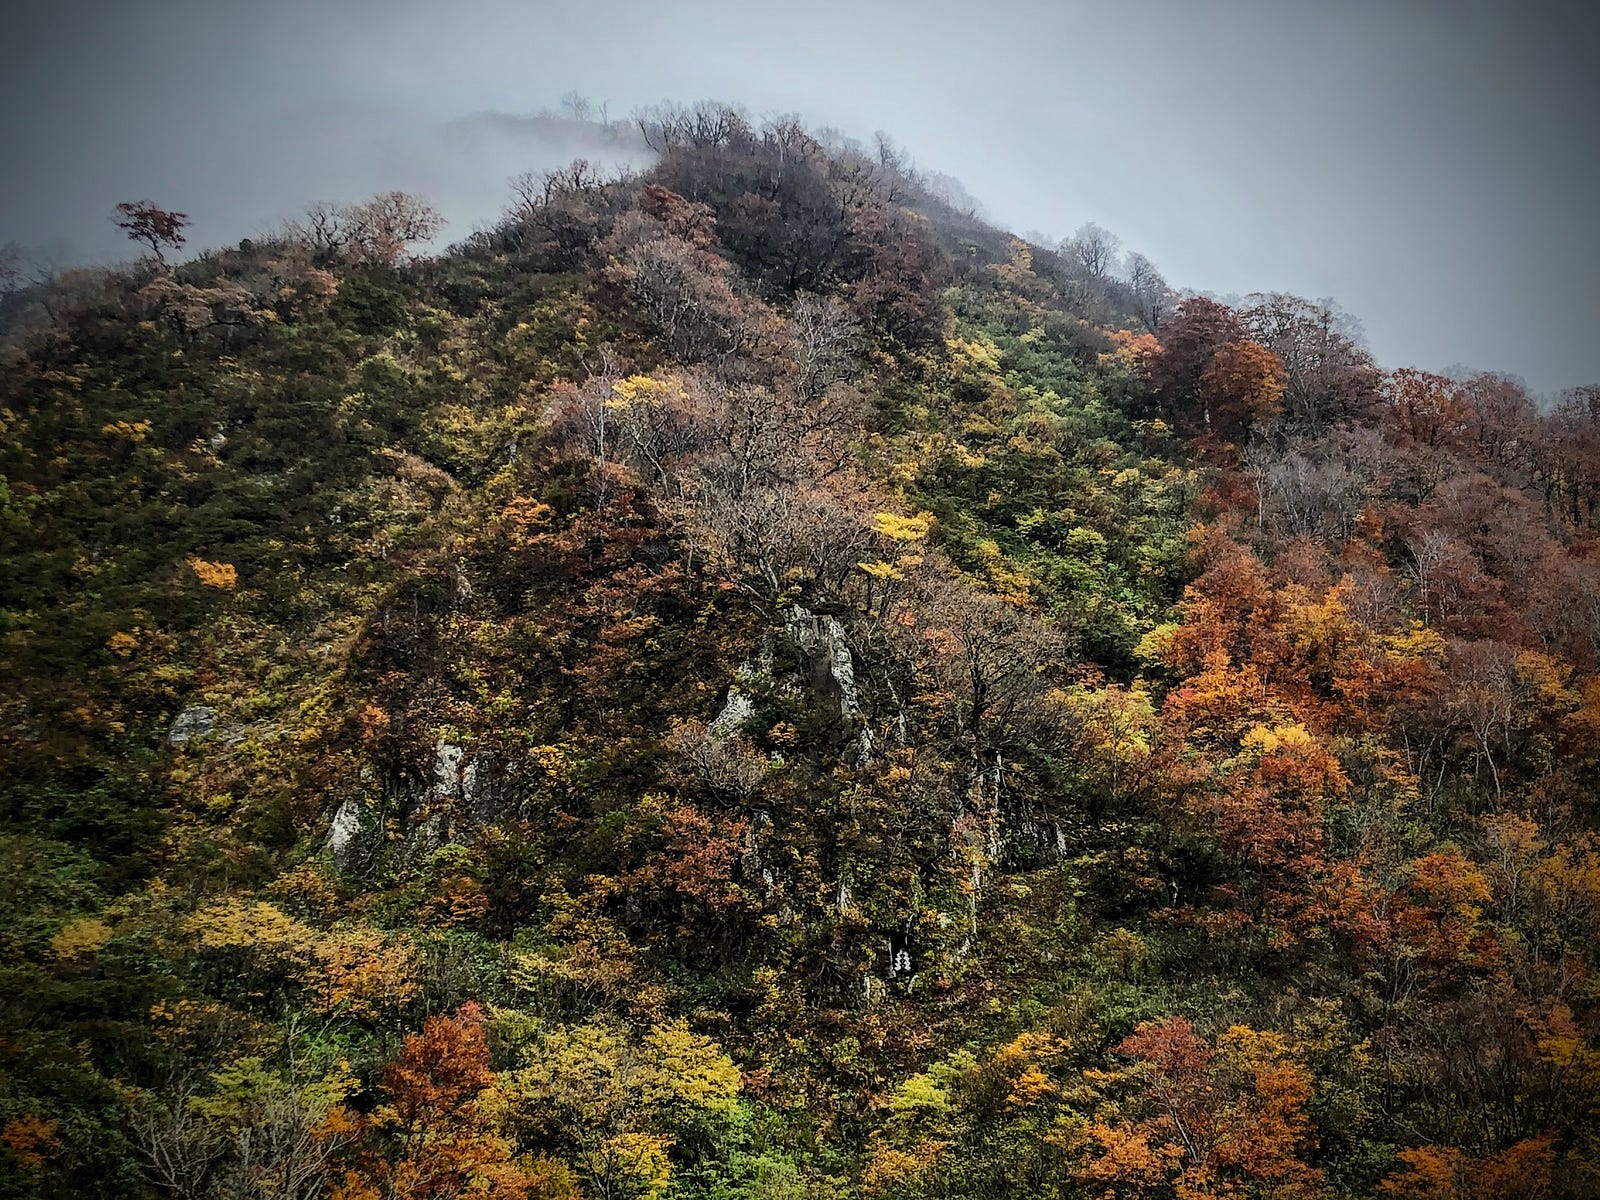 A cliff face with a spattering of autumn foliage and a small cave where those who became Sokushinbutsu, Living Buddha or Buddha Mummies, trained in Sen’ninzawa, The Swamp of Immortals, on Mt. Yudono